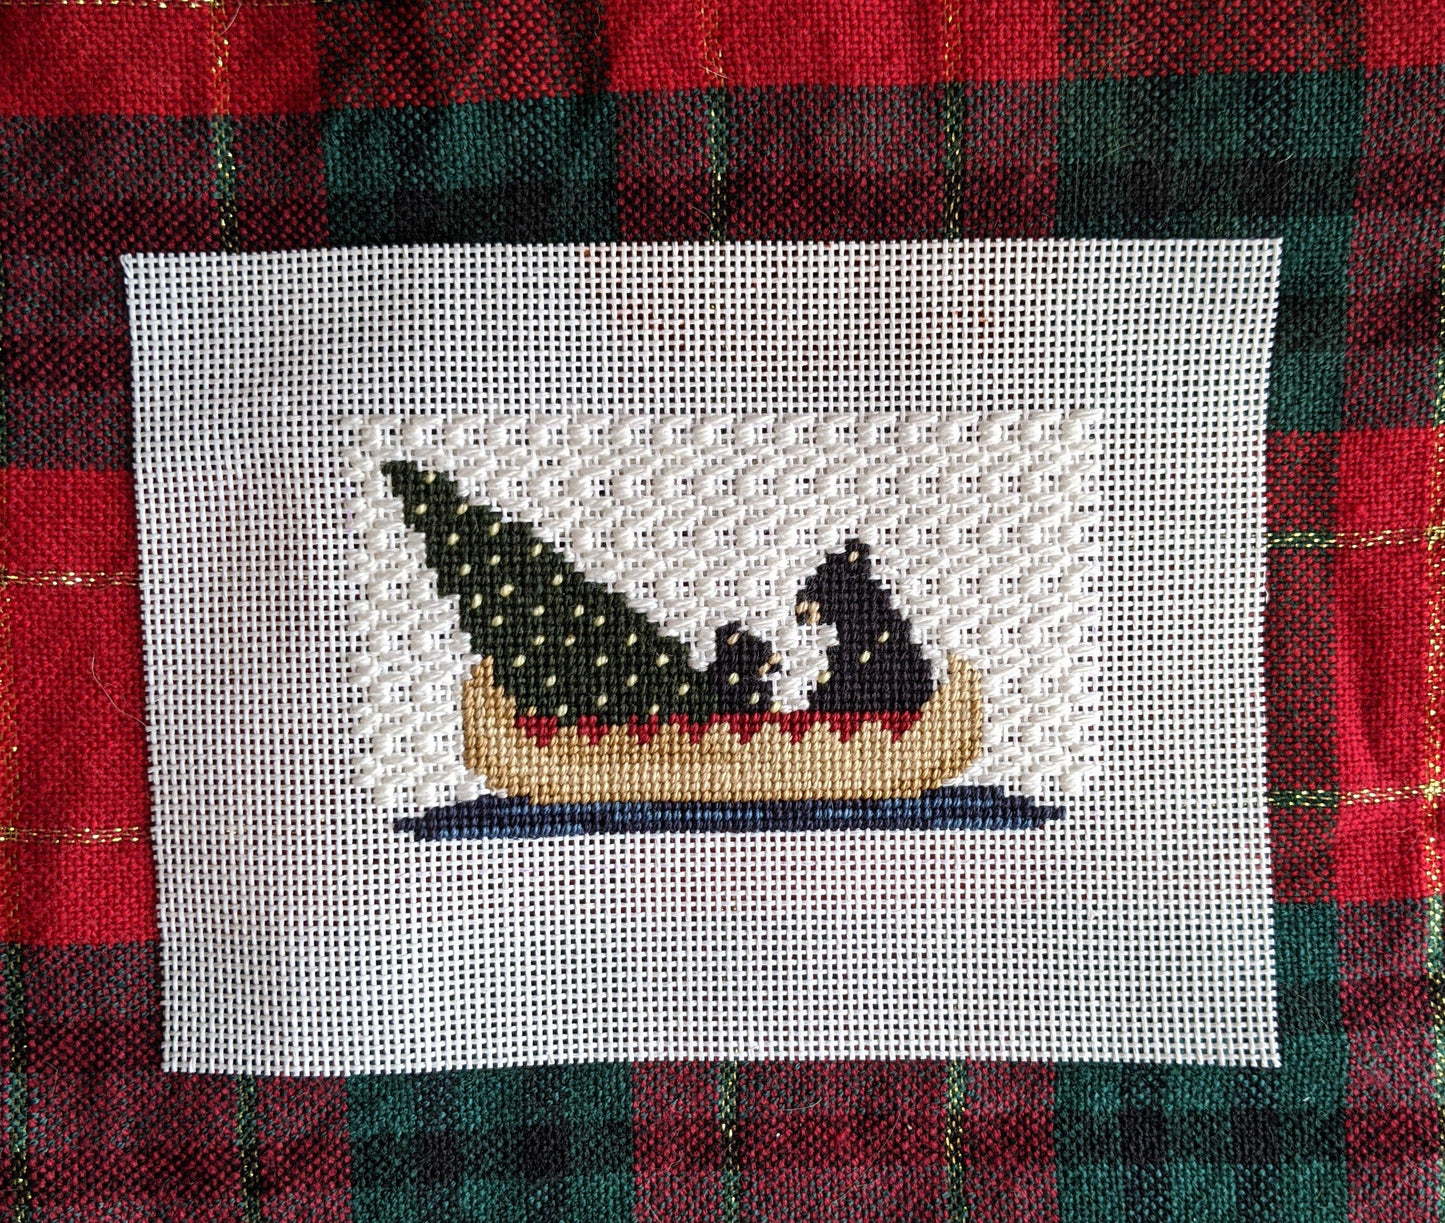 Home for the Holidays Stitch Chart